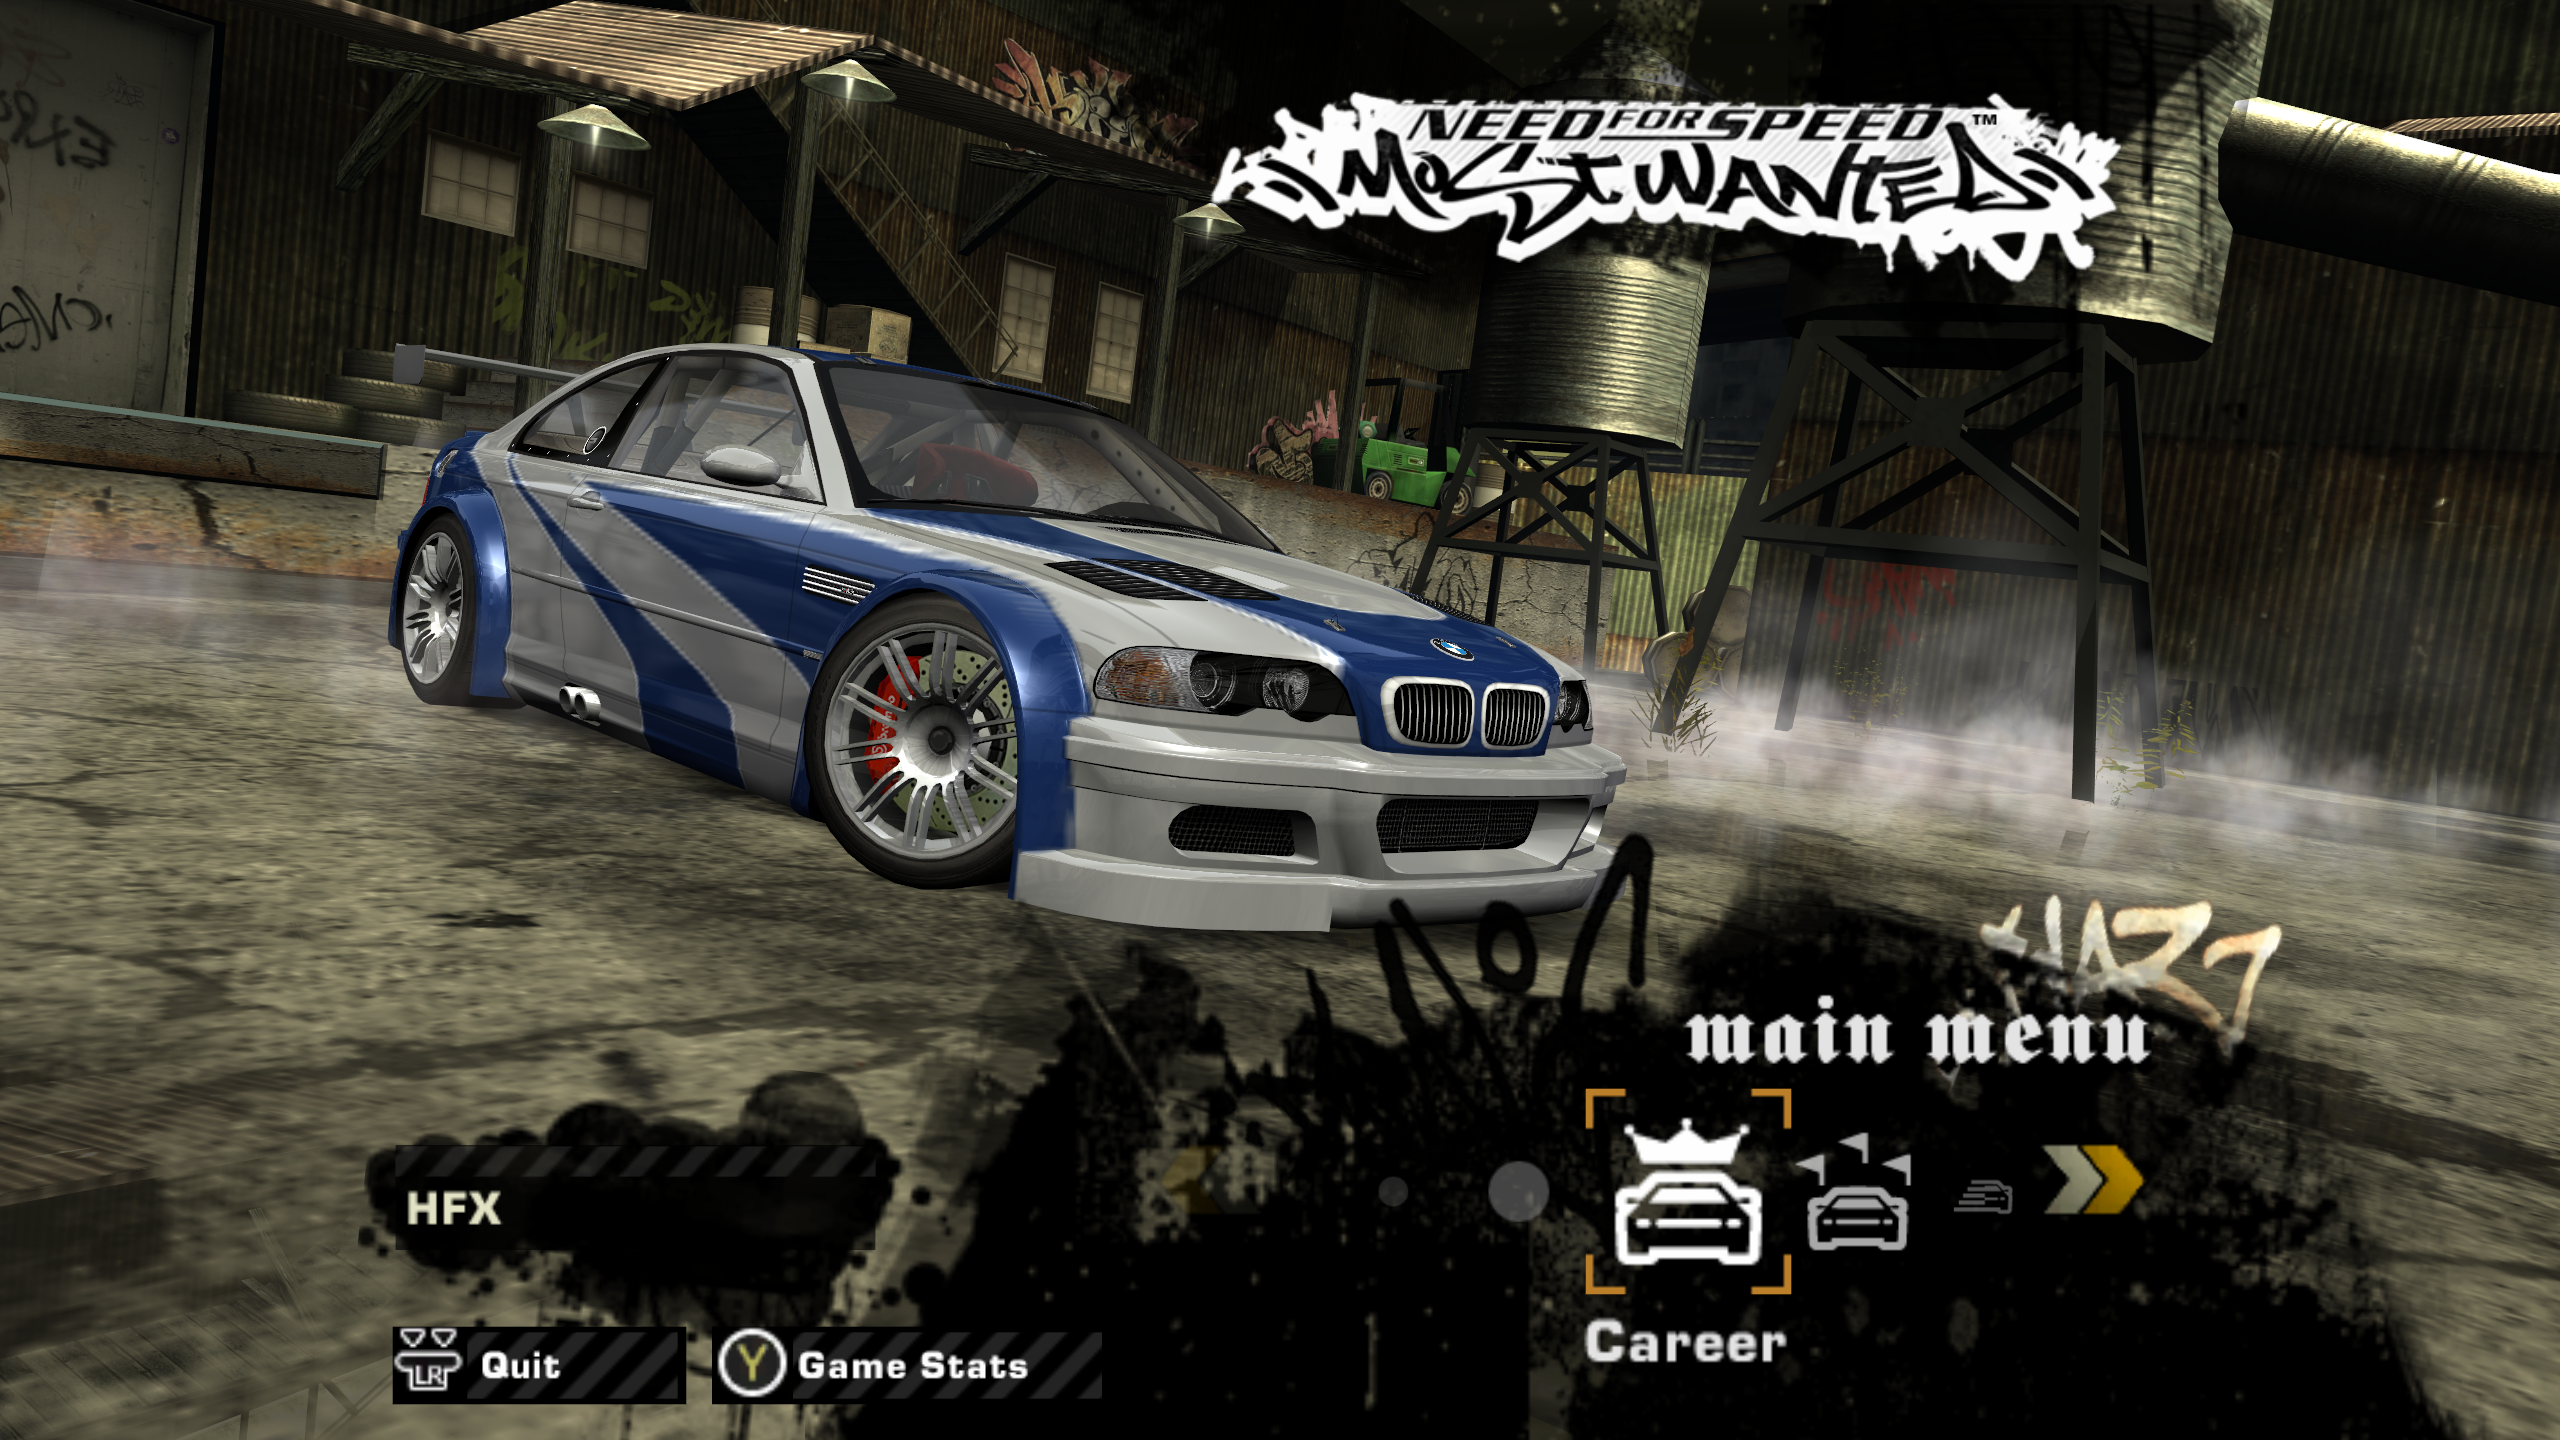 Песни из игры мост вантед. Nissan Silvia для NFS most wanted 2005. Toyota Camry для most wanted 2005. Игра most wanted 2005. Из need for Speed most wanted 2005.